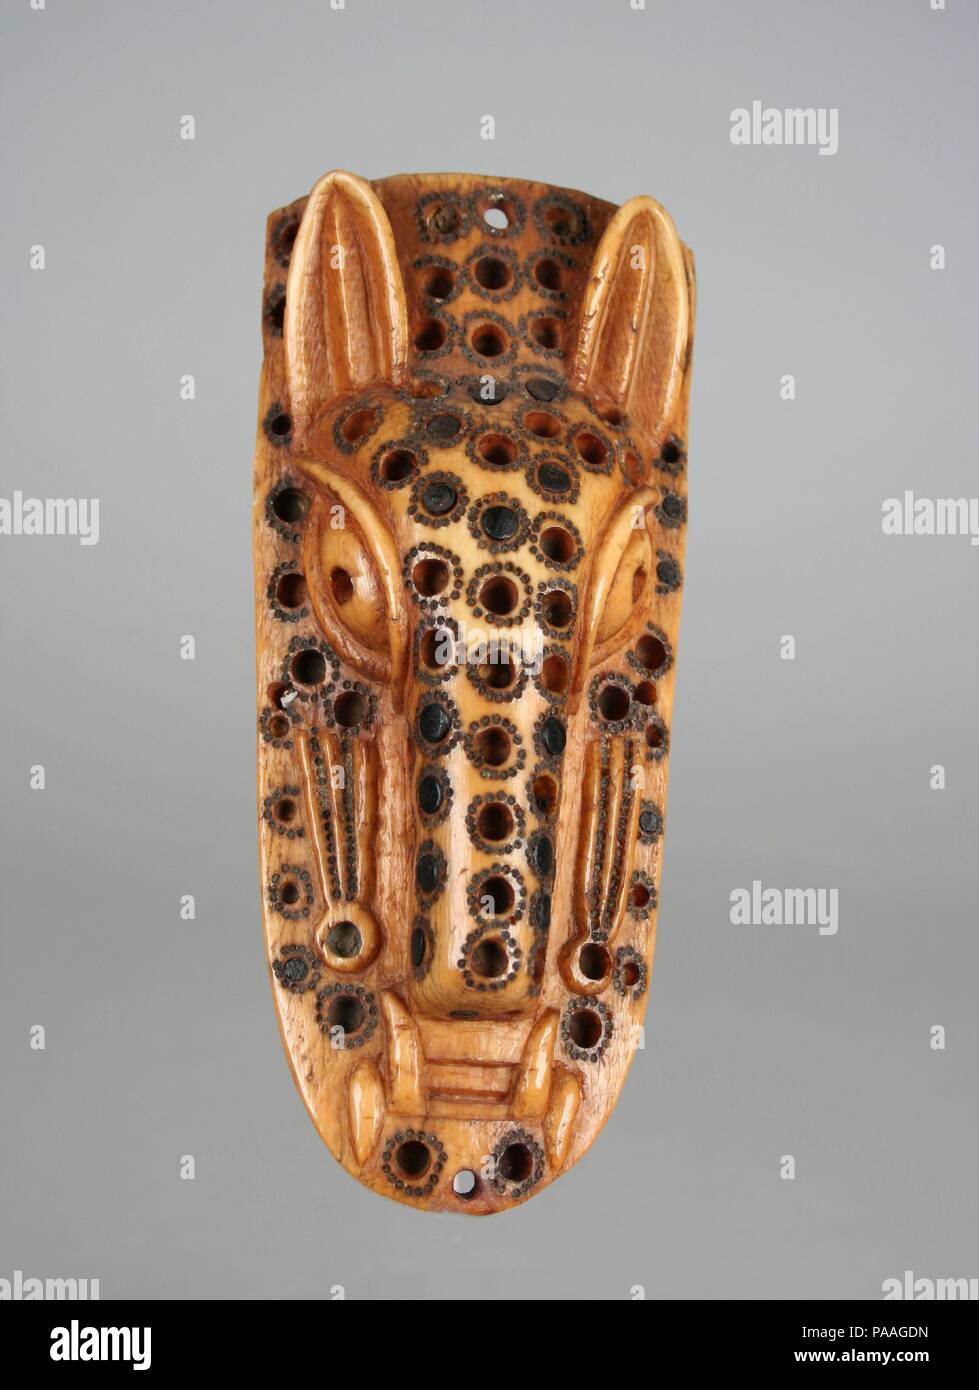 Masquerade Element: Leopard Head (Omama). Culture: Yoruba peoples, Owo group. Dimensions: H. 6 x W. 2 1/2 x D. 1 1/8 in. (15.2 x 6.4 x 2.8 cm). Date: 17th-19th century.  The influence of Benin royal art is particularly apparent in Owo, a Yoruba kingdom that came under Benin control in the fifteenth century and again in the eighteenth. Located on the eastern edge of Yorubaland, Owo is almost equidistant from Benin and Ife, the Yoruba cultural and religious center from which the reigning dynasty in Benin traces its origin. Although some Owo artworks resemble the highly naturalistic brass and ter Stock Photo